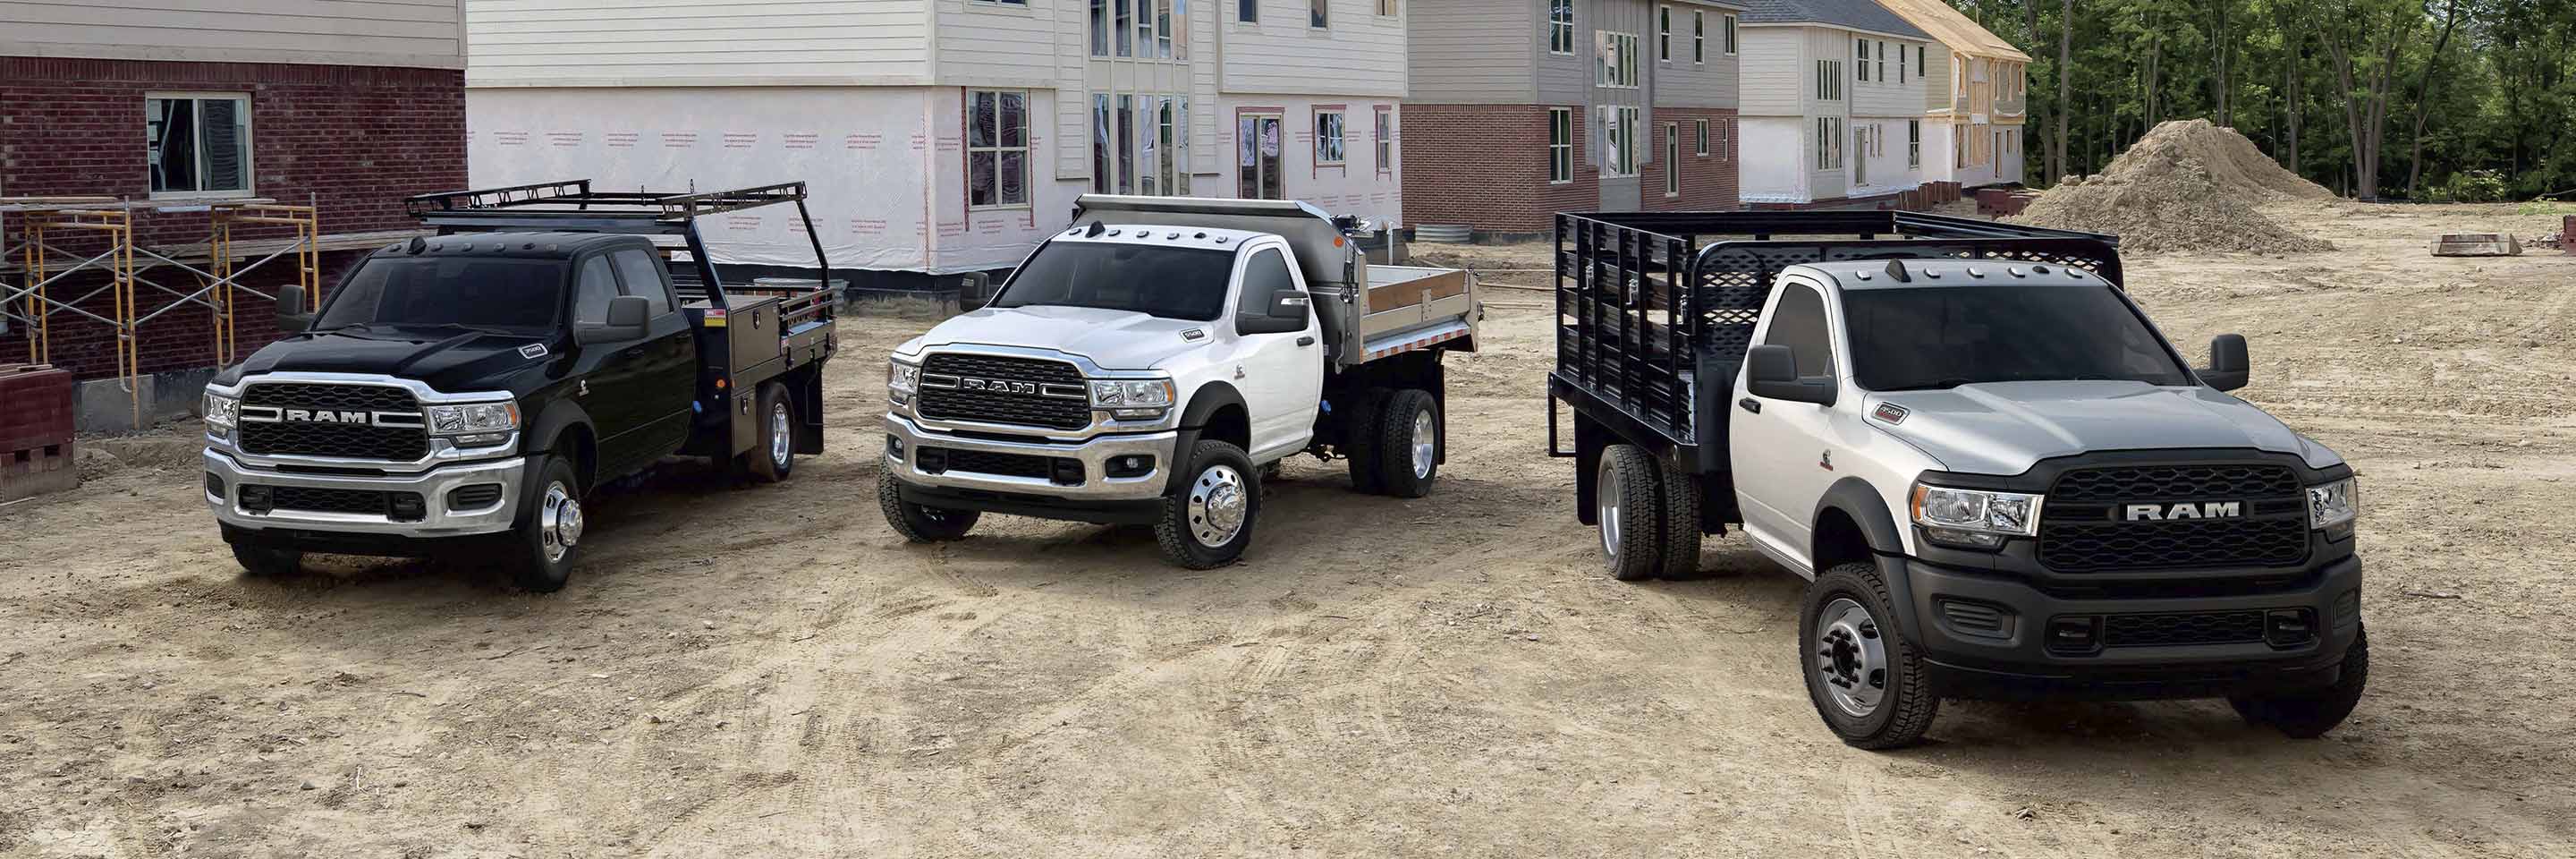 Three 2023 Ram Chassis Cabs parked at a construction site, each with a different upfit. From left to right: a Ram 5500 Tradesman Chassis Cab with a stake bed upfit, a Ram 5500 SLT Chassis Cab with dump upfit and a Ram 4500 Tradesman Chassis Cab with landscaper upfit. 